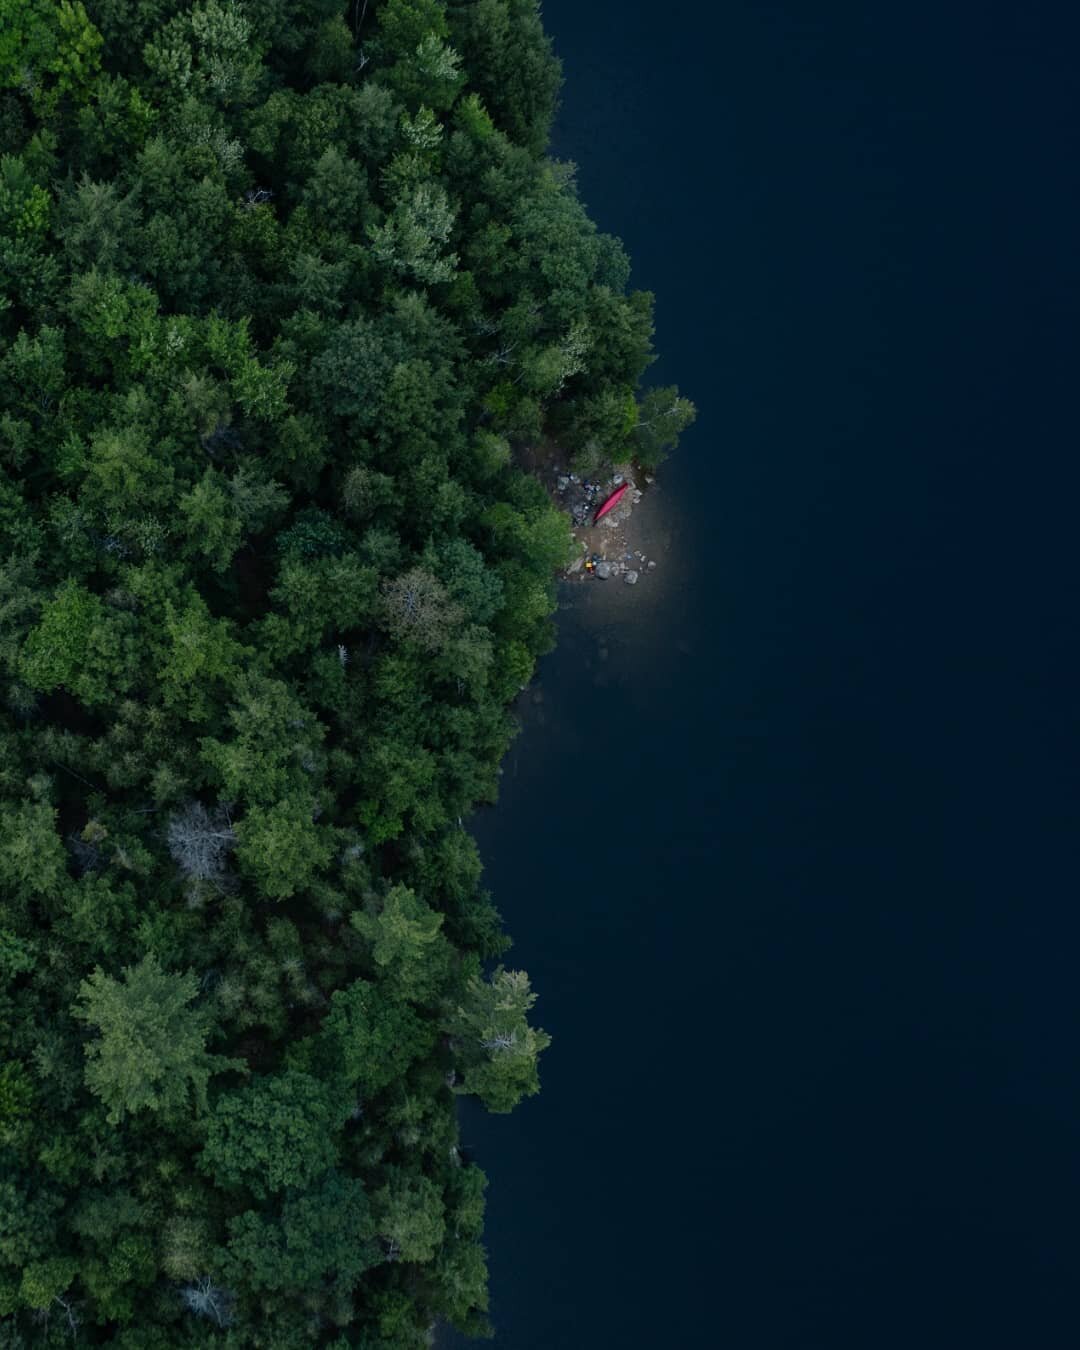 Our camp this summer in Poisson Blanc Regional Park in Quebec while filming with @dalal_el_hanna + @elloriemcknight - the lakes and waterways of Ontario and Quebec are incredibly beautiful and diverse ecosystems. It has me dreaming of a portage trip 